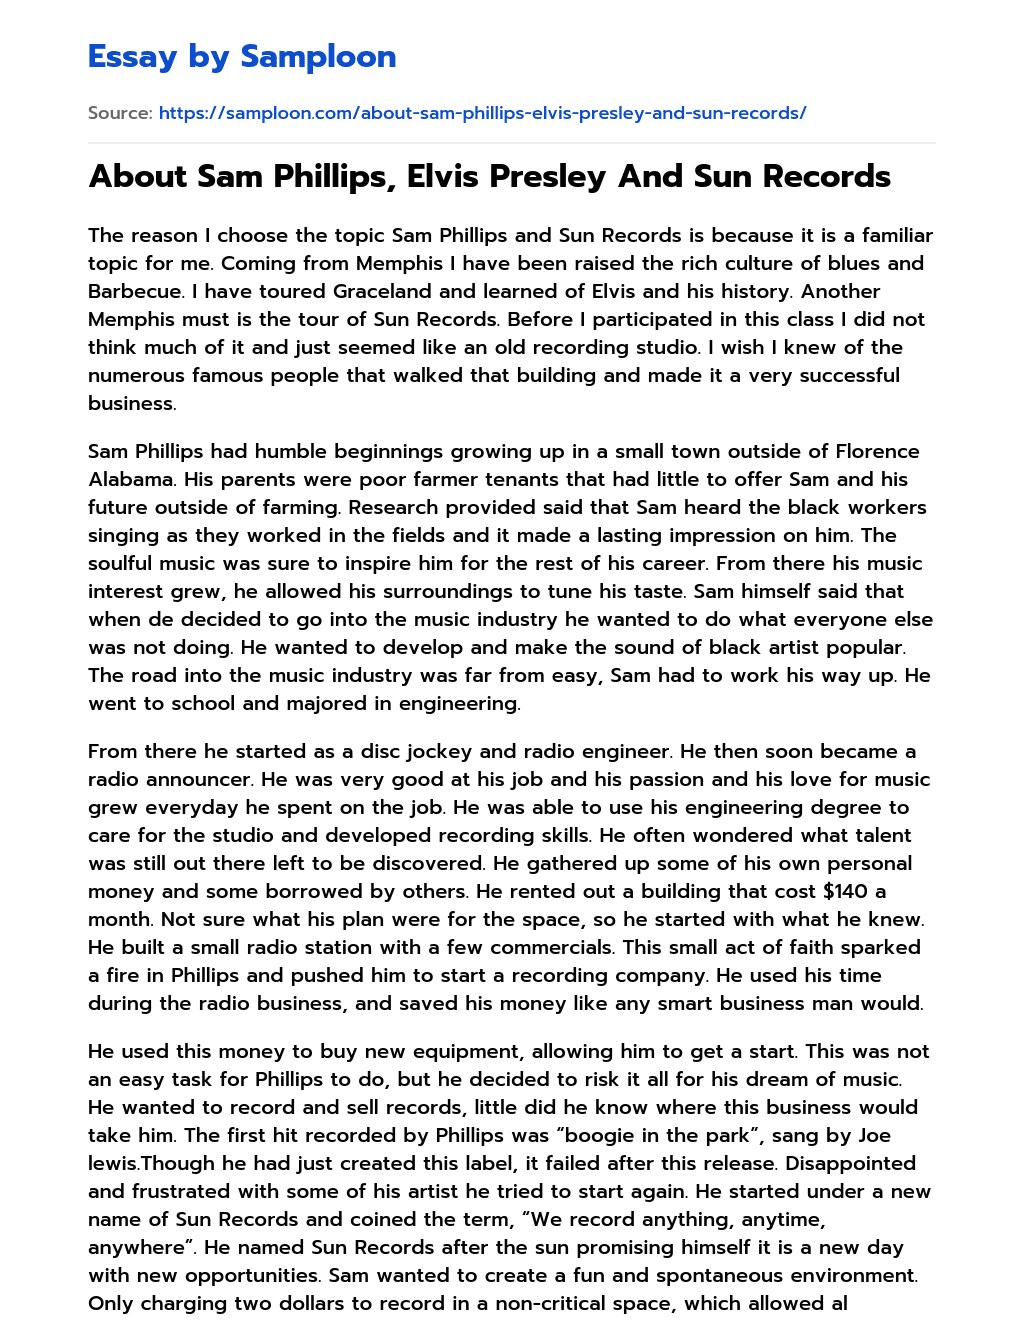 About Sam Phillips, Elvis Presley And Sun Records essay